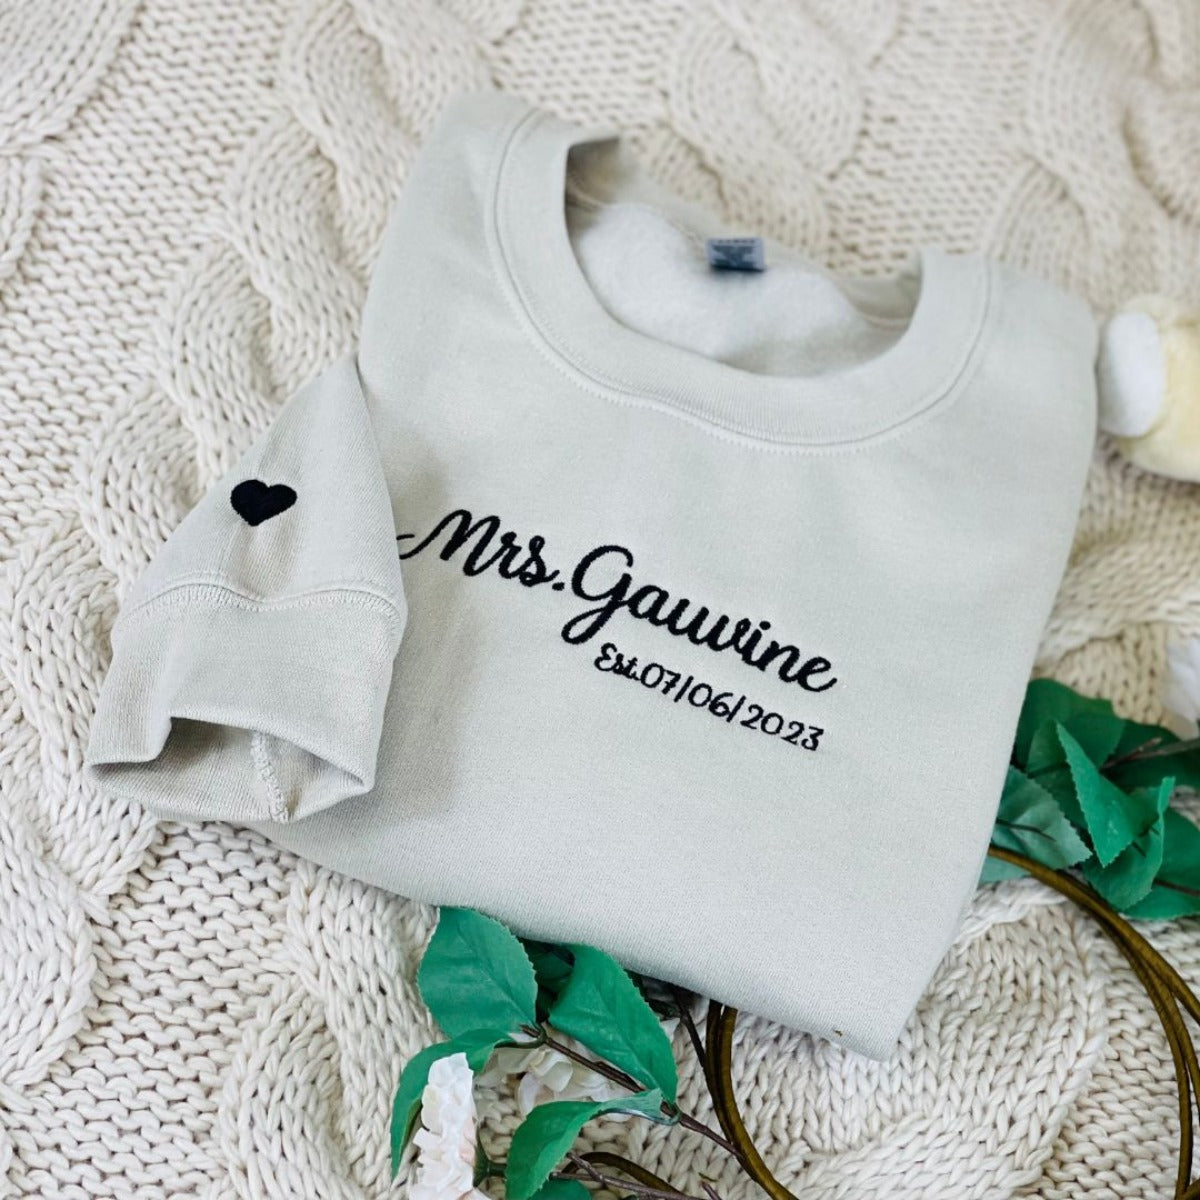 Custom Mrs Sweatshirt Embroidered, Bride Gifts for Honeymoon Wedding Day with Initial Heart or Roman Date on Sleeve